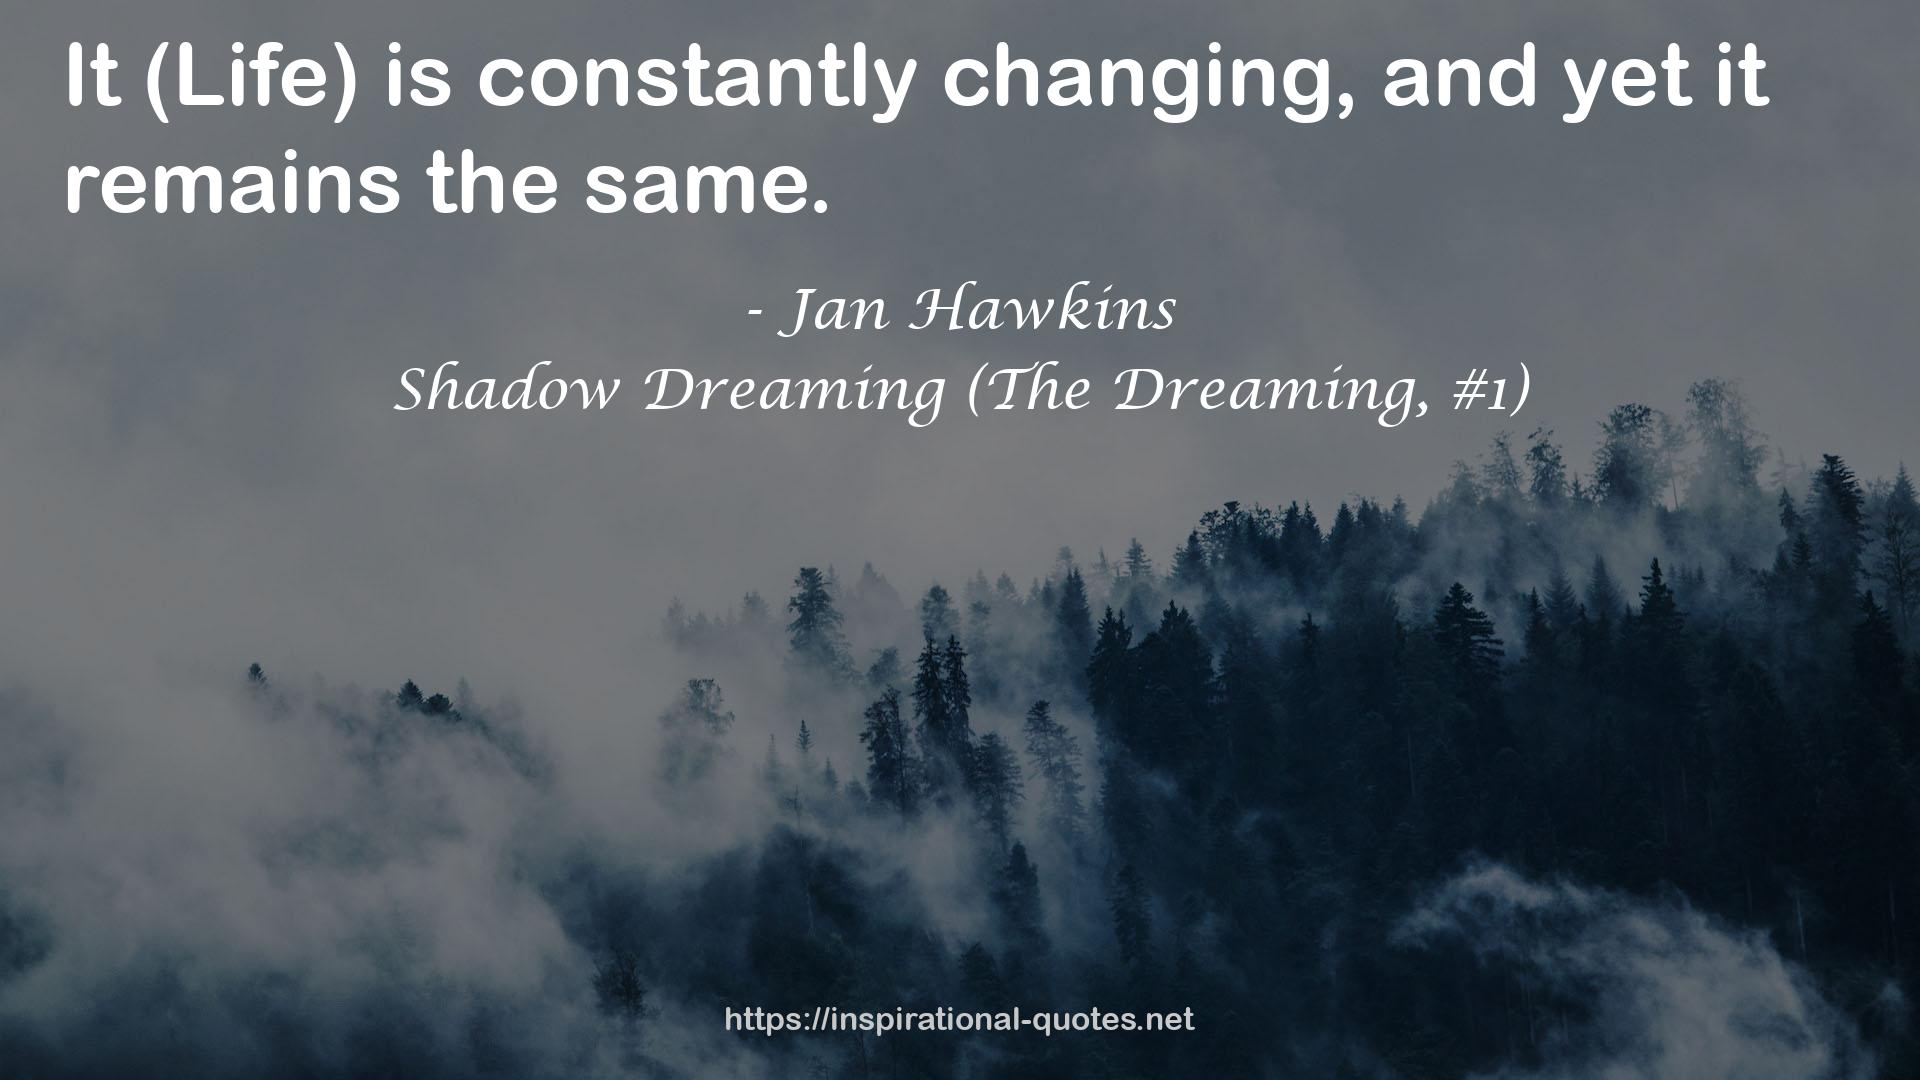 Shadow Dreaming (The Dreaming, #1) QUOTES